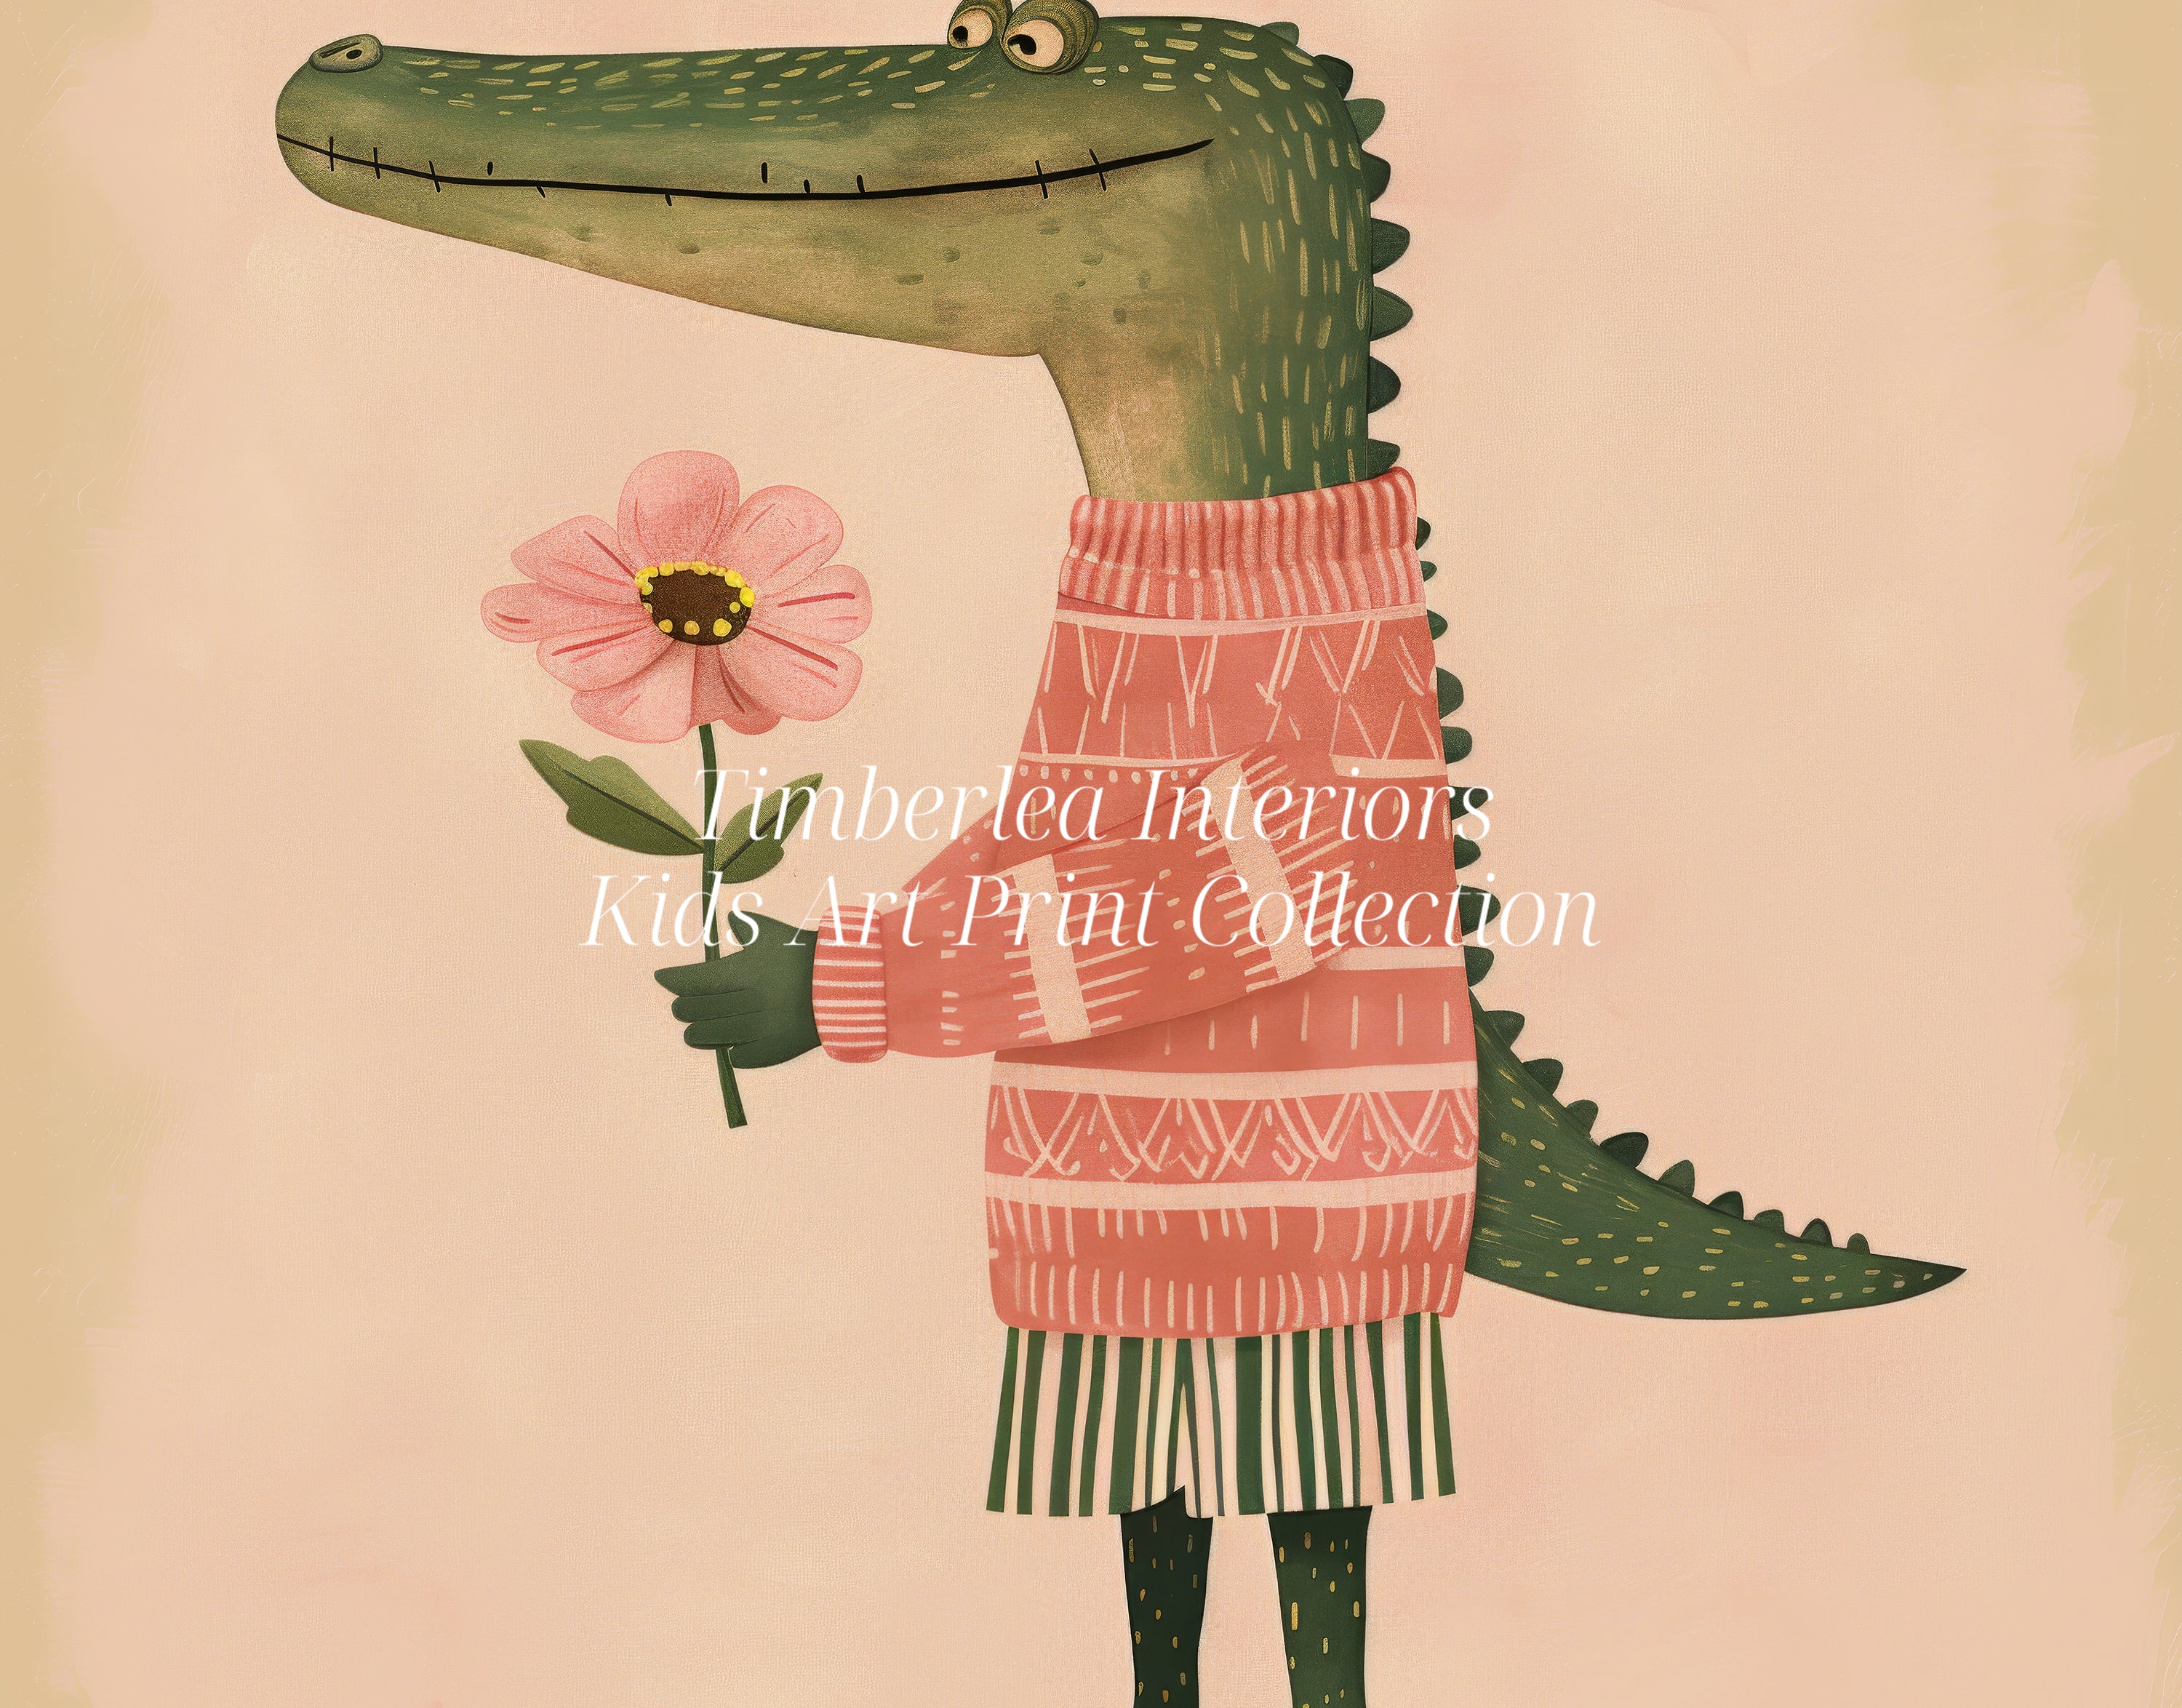 Close-up of the 'Gentle Gator Blooms' art print featuring a friendly alligator wearing a pink sweater and holding a flower.